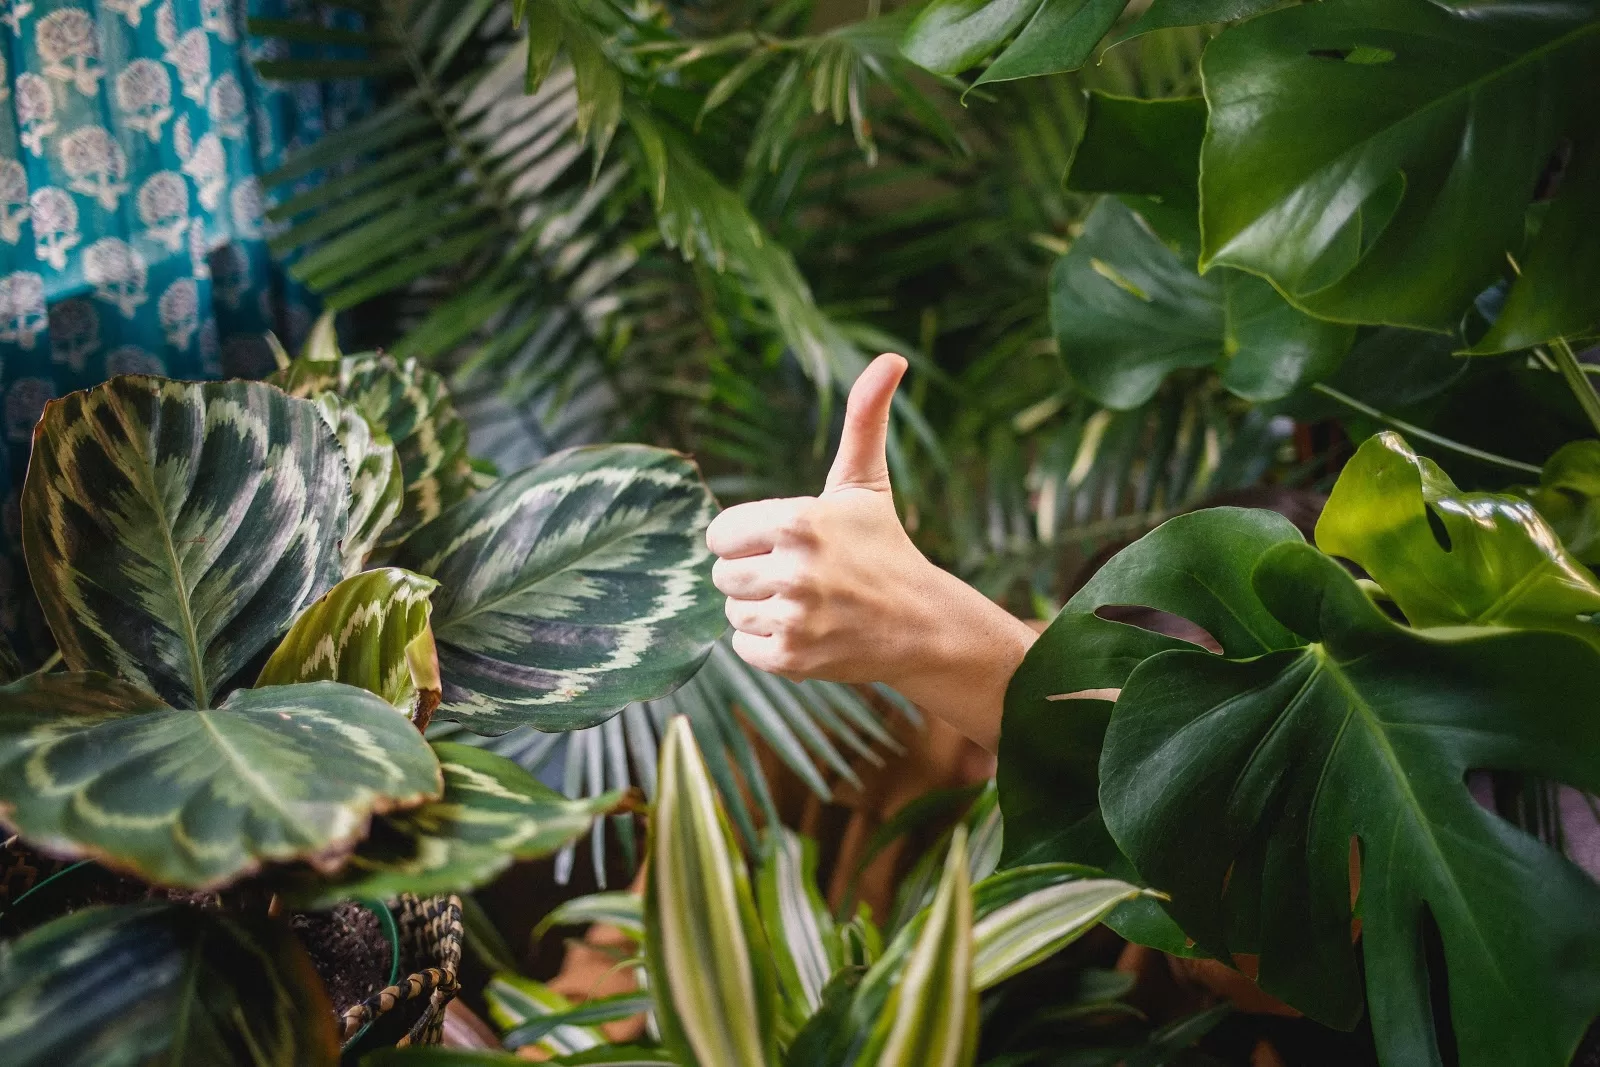 Thumbs up amongst plants in air conditioning